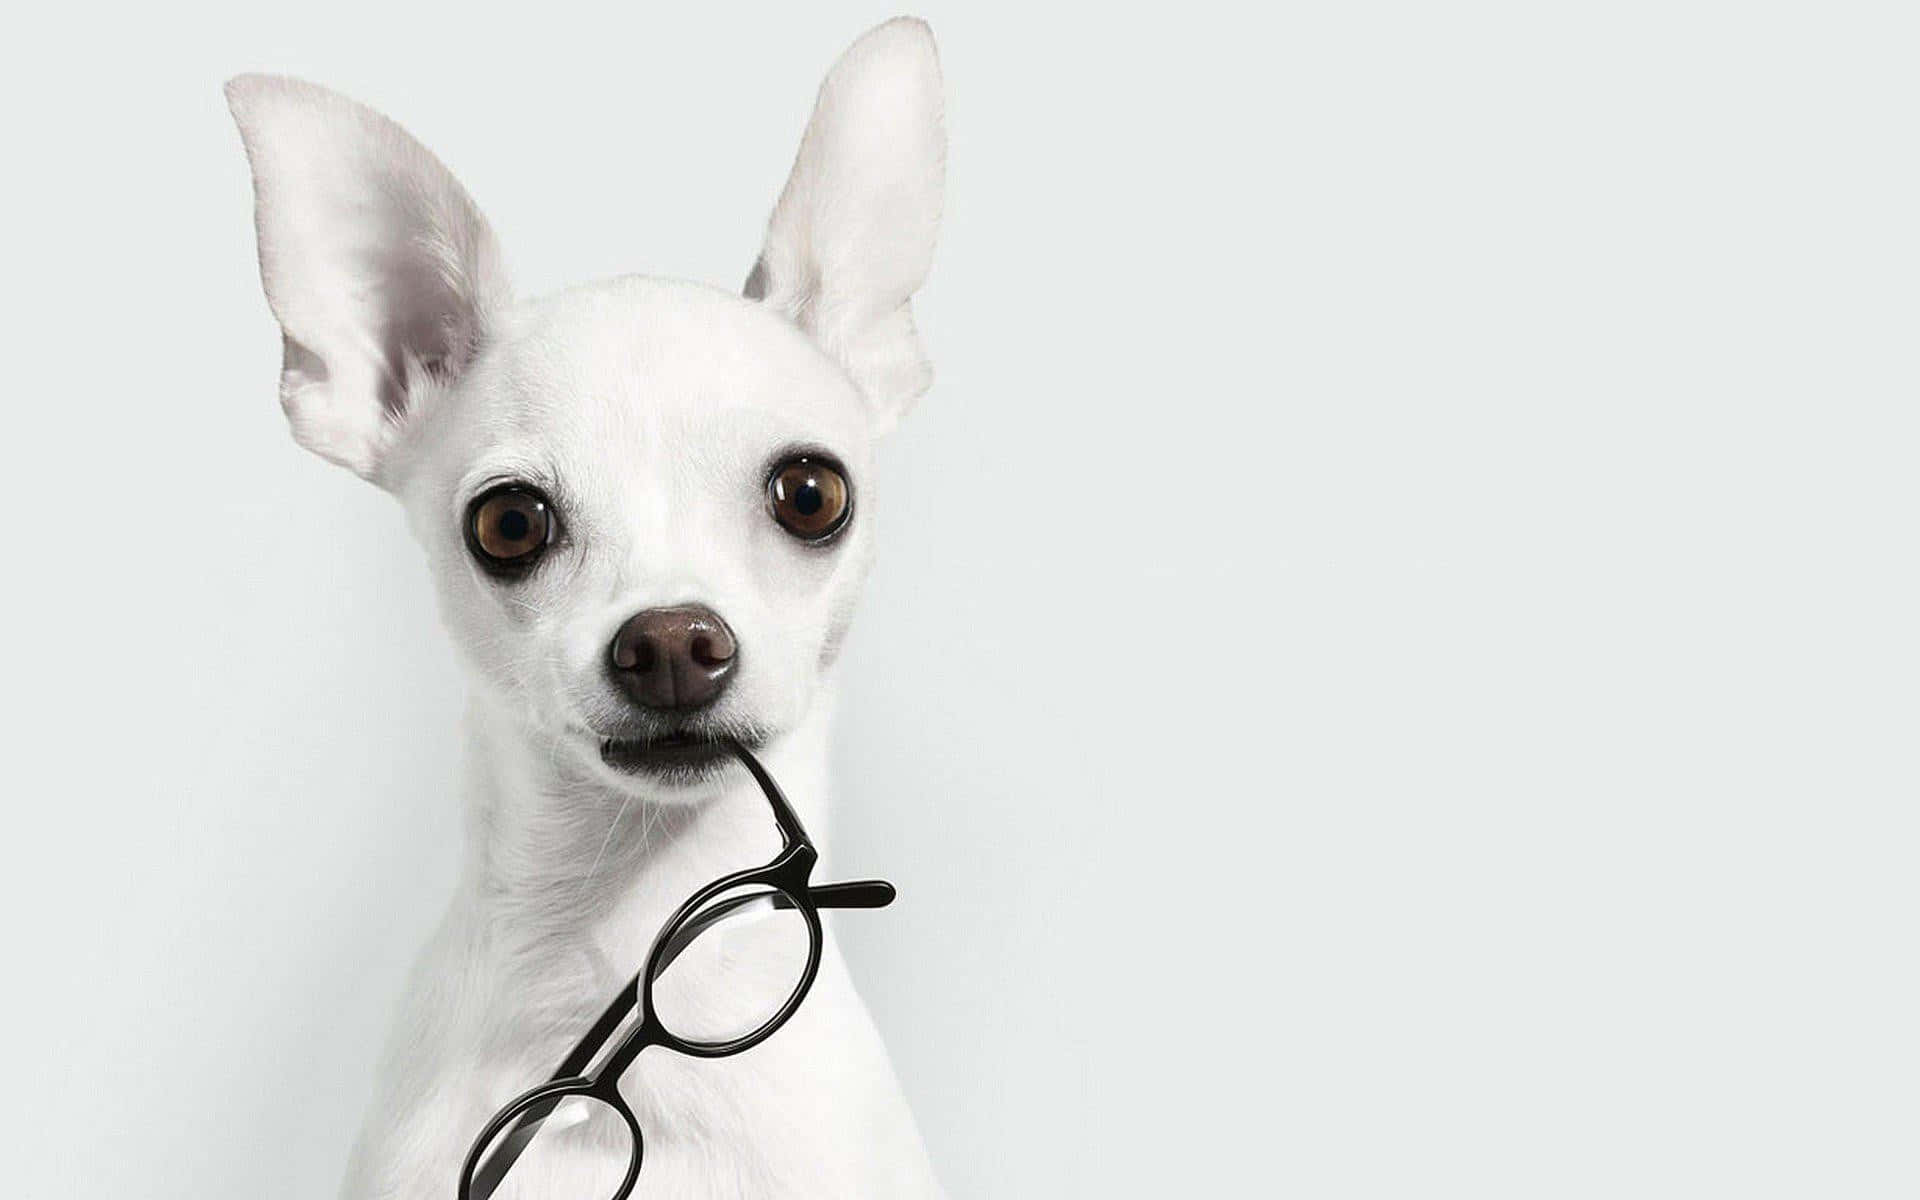 Adorable White Chihuahua playfully biting a pair of eyeglasses Wallpaper